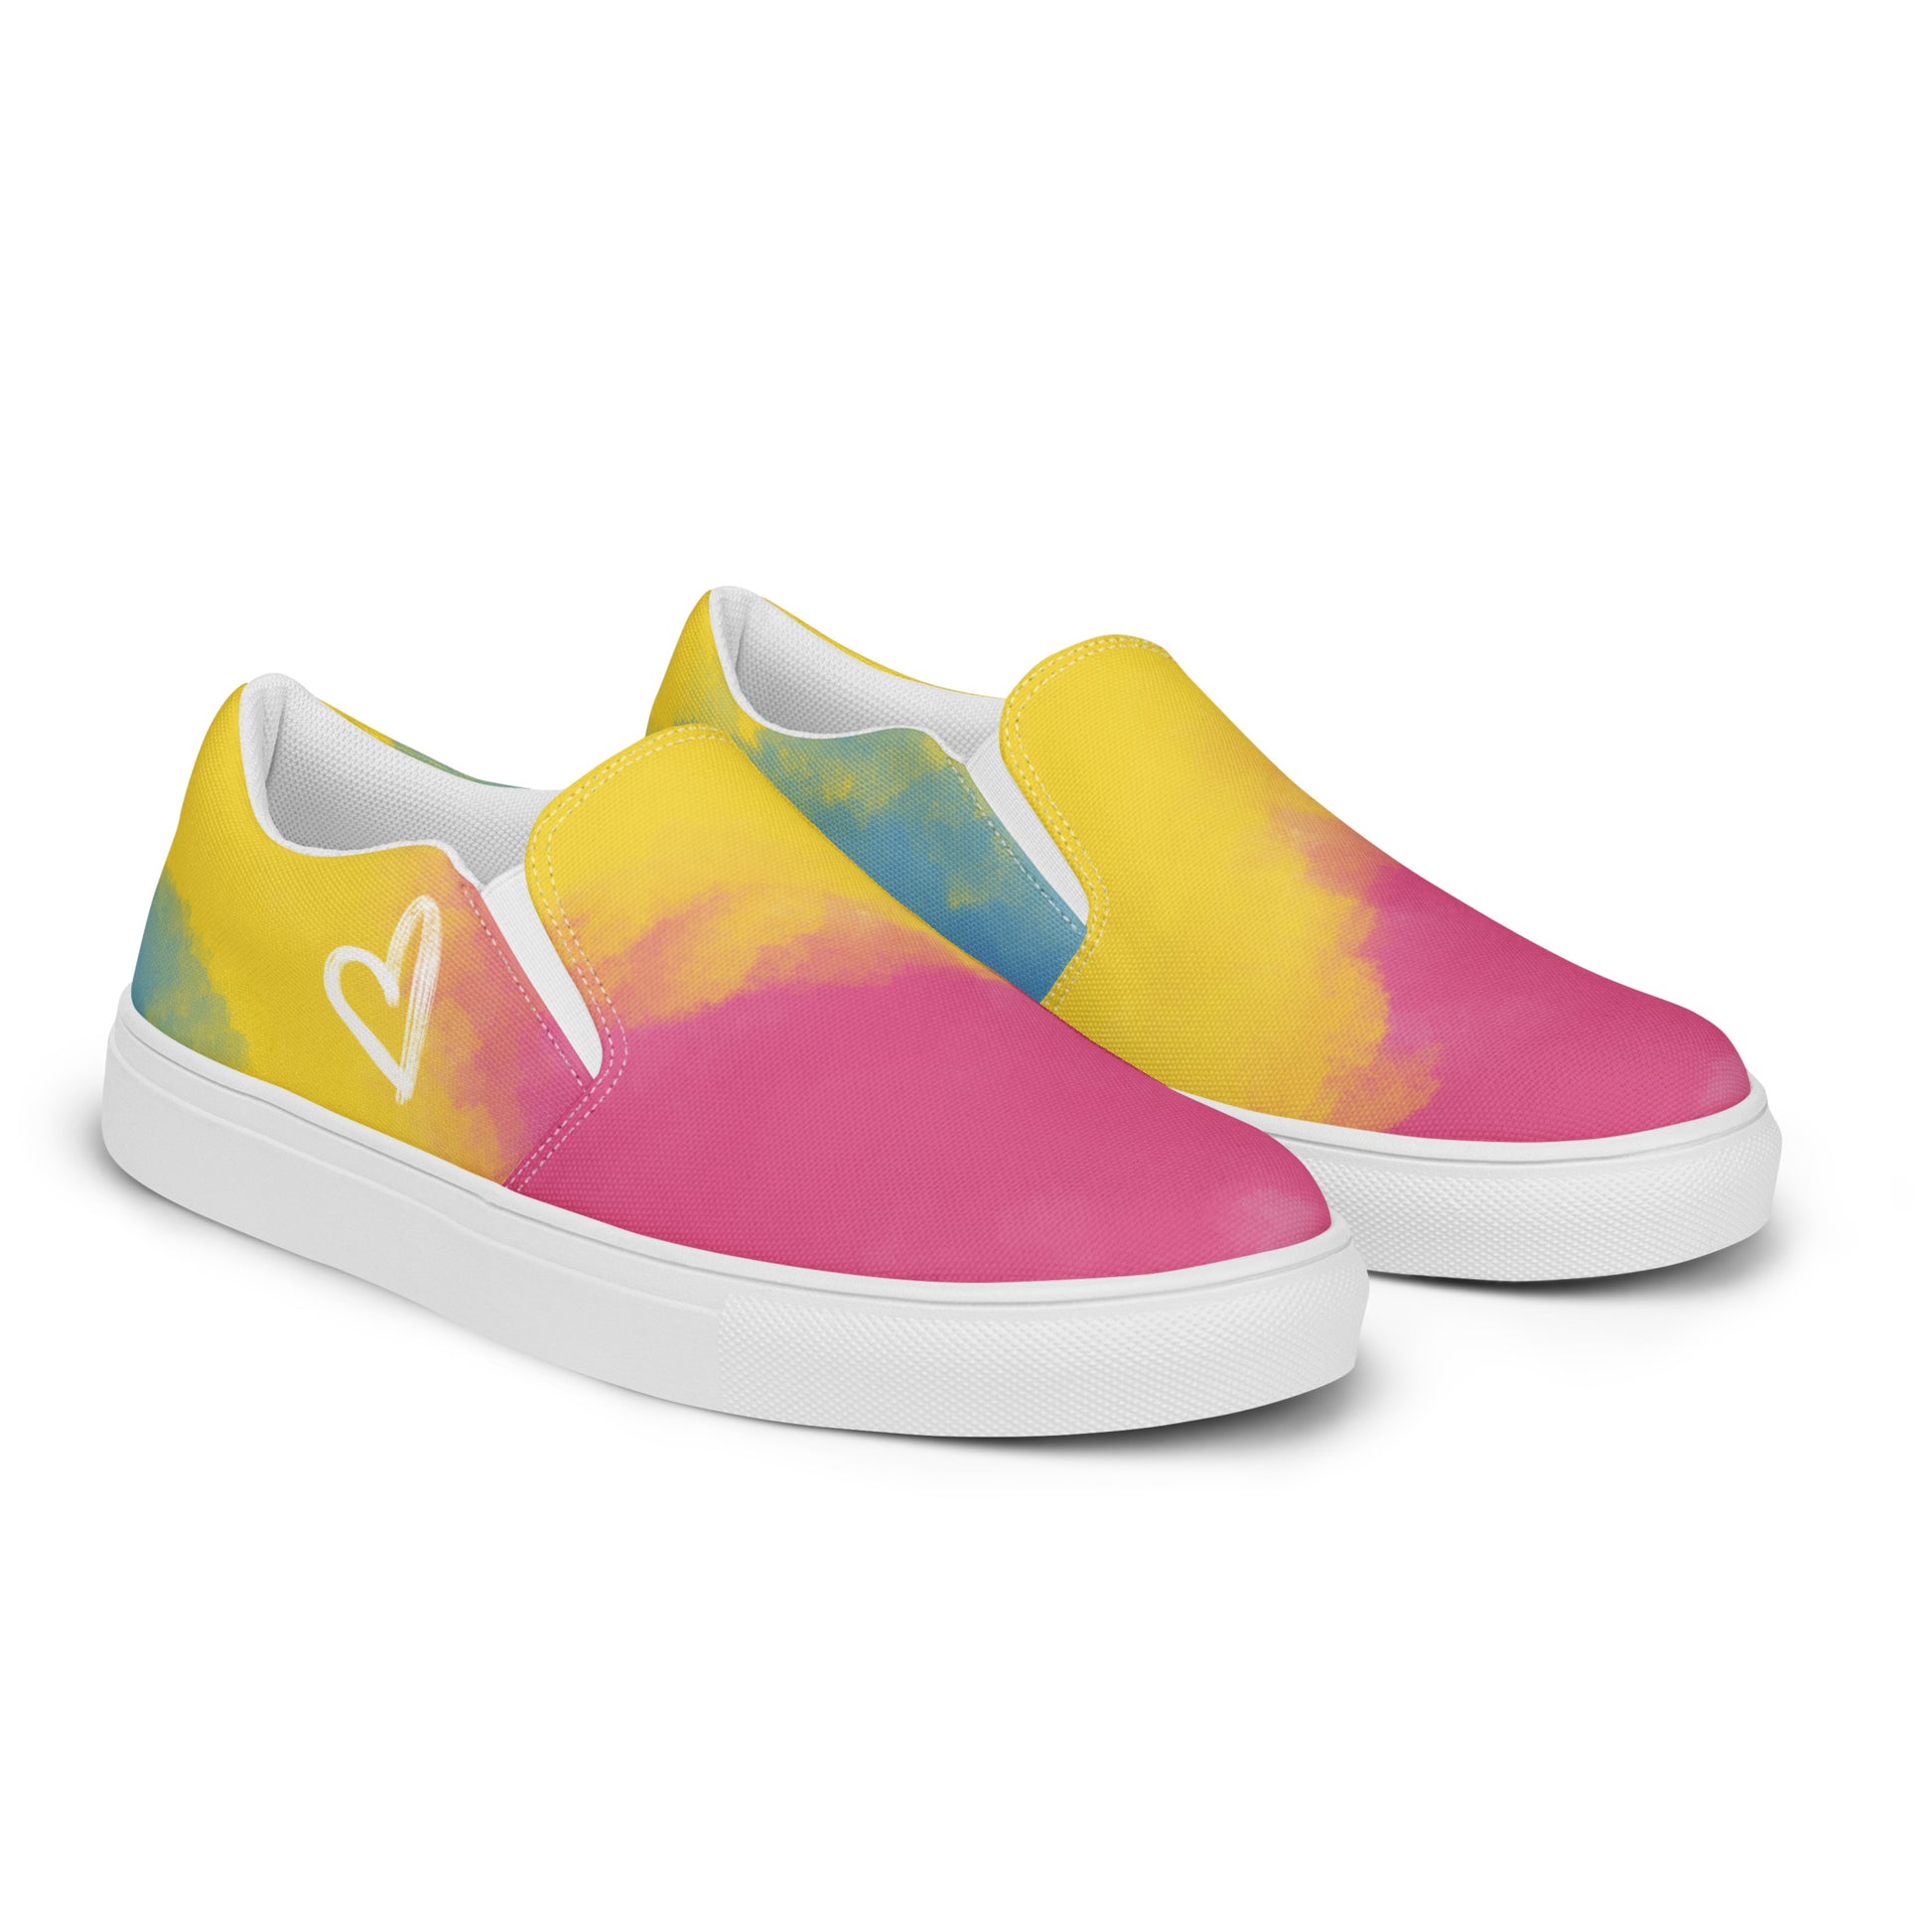 Right front view: A pair of slip on shoes with color block pink, yellow, and blue clouds, a white hand drawn heart, and the Aras Sivad logo on the back.